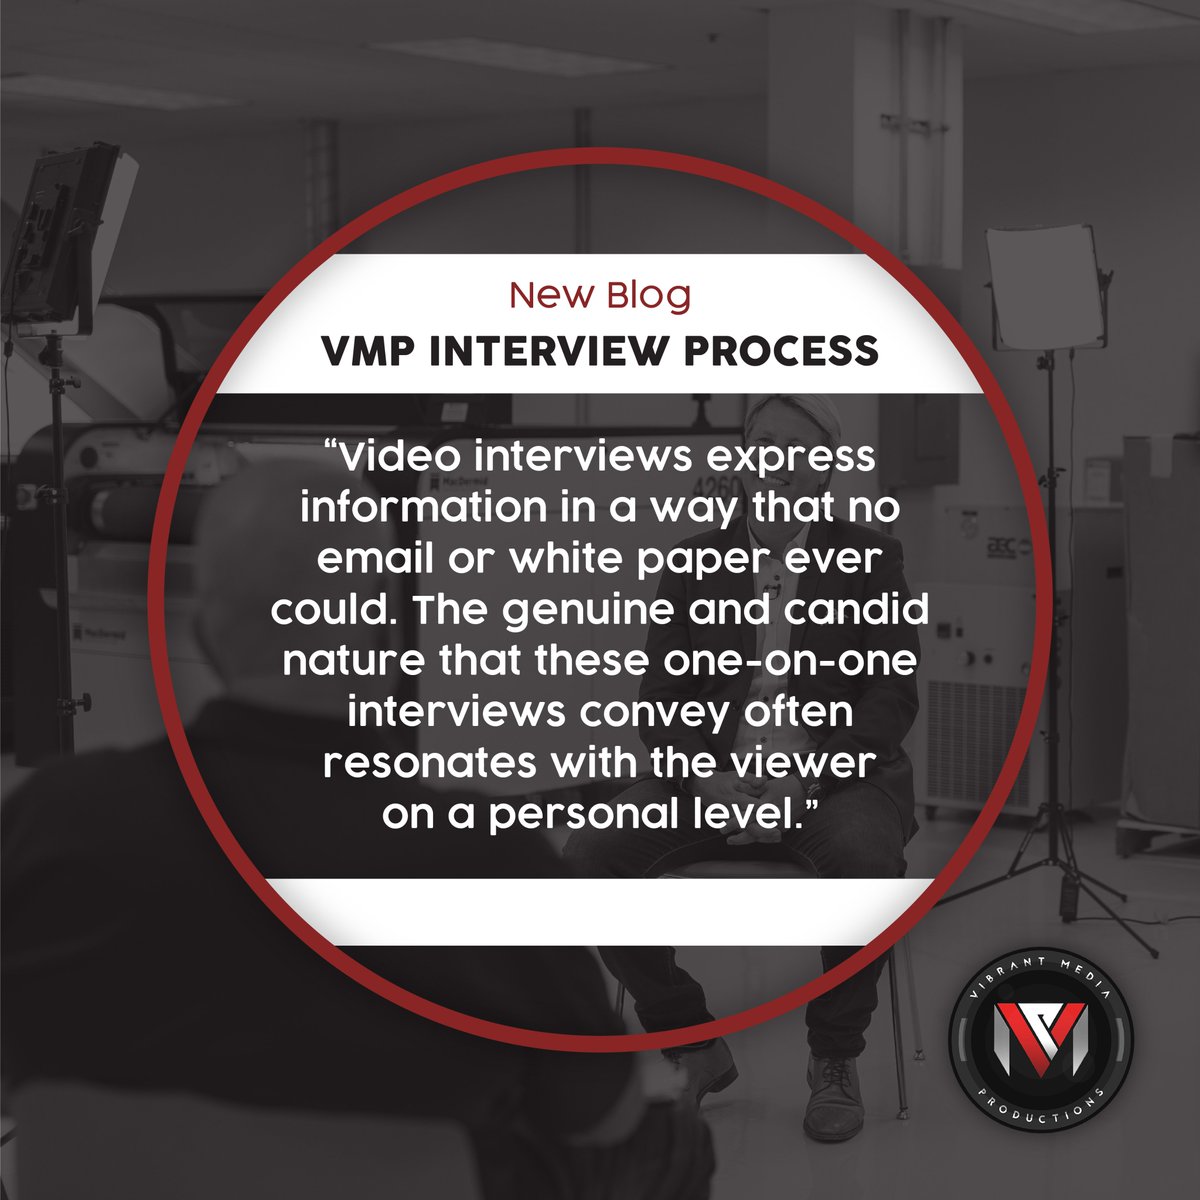 Take a look at our recent blog post on our interview style, lots of great insight!

vibrantmediaproductions.com/vmp-interview-…
#videoproduction #orlando #corporatevideo #InterviewTips #blog #productionhub #orlandovideographer